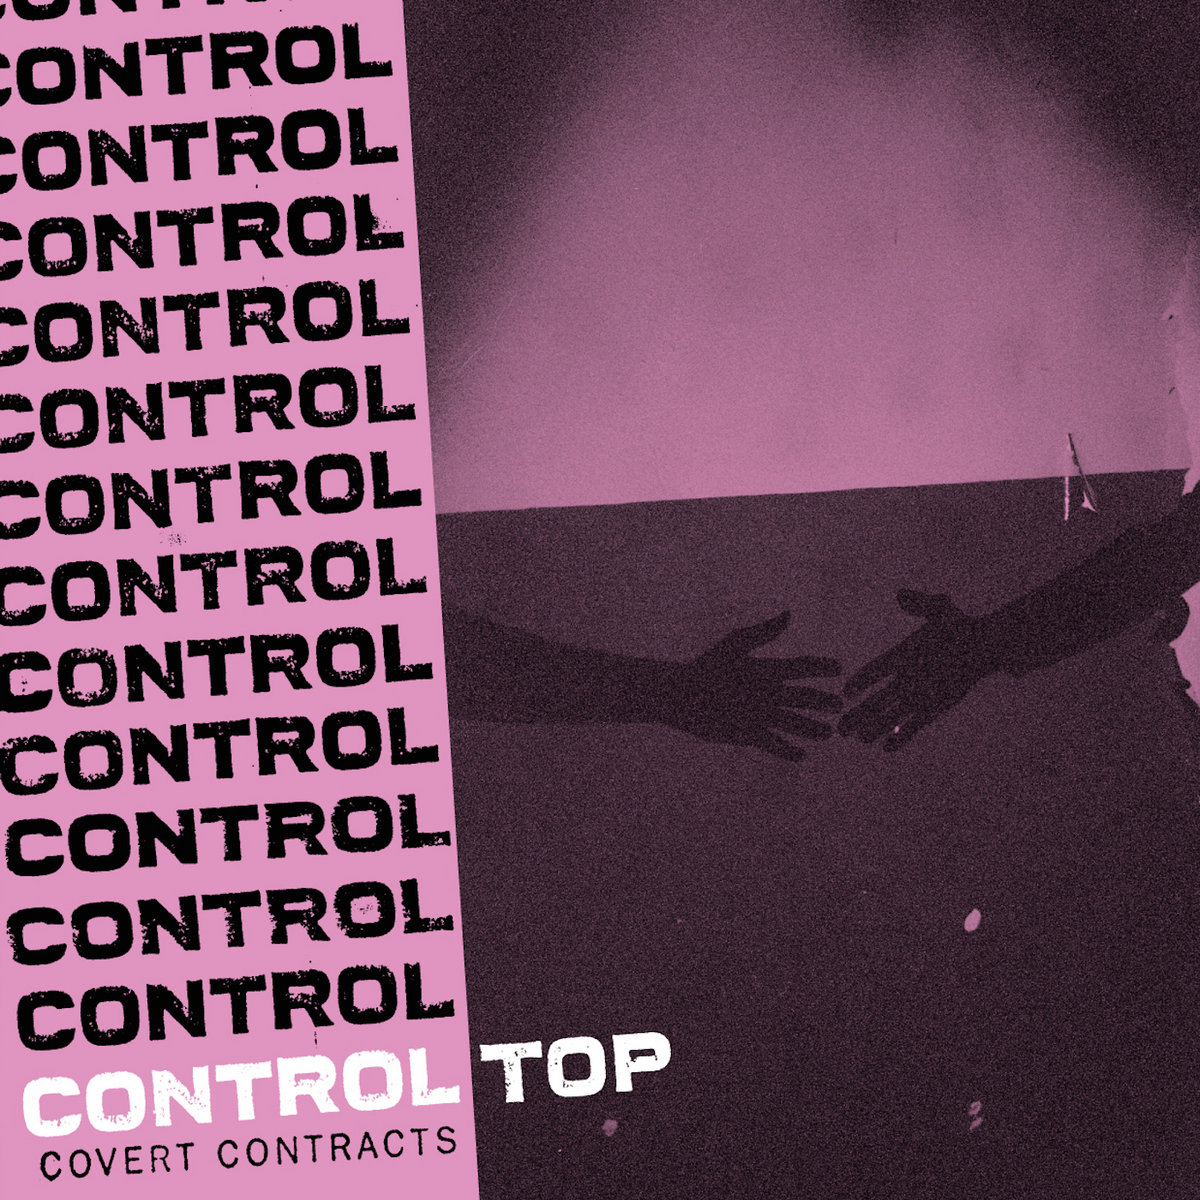 Semipop Life: Sorry (not sorry). Control Top: Covert Contracts